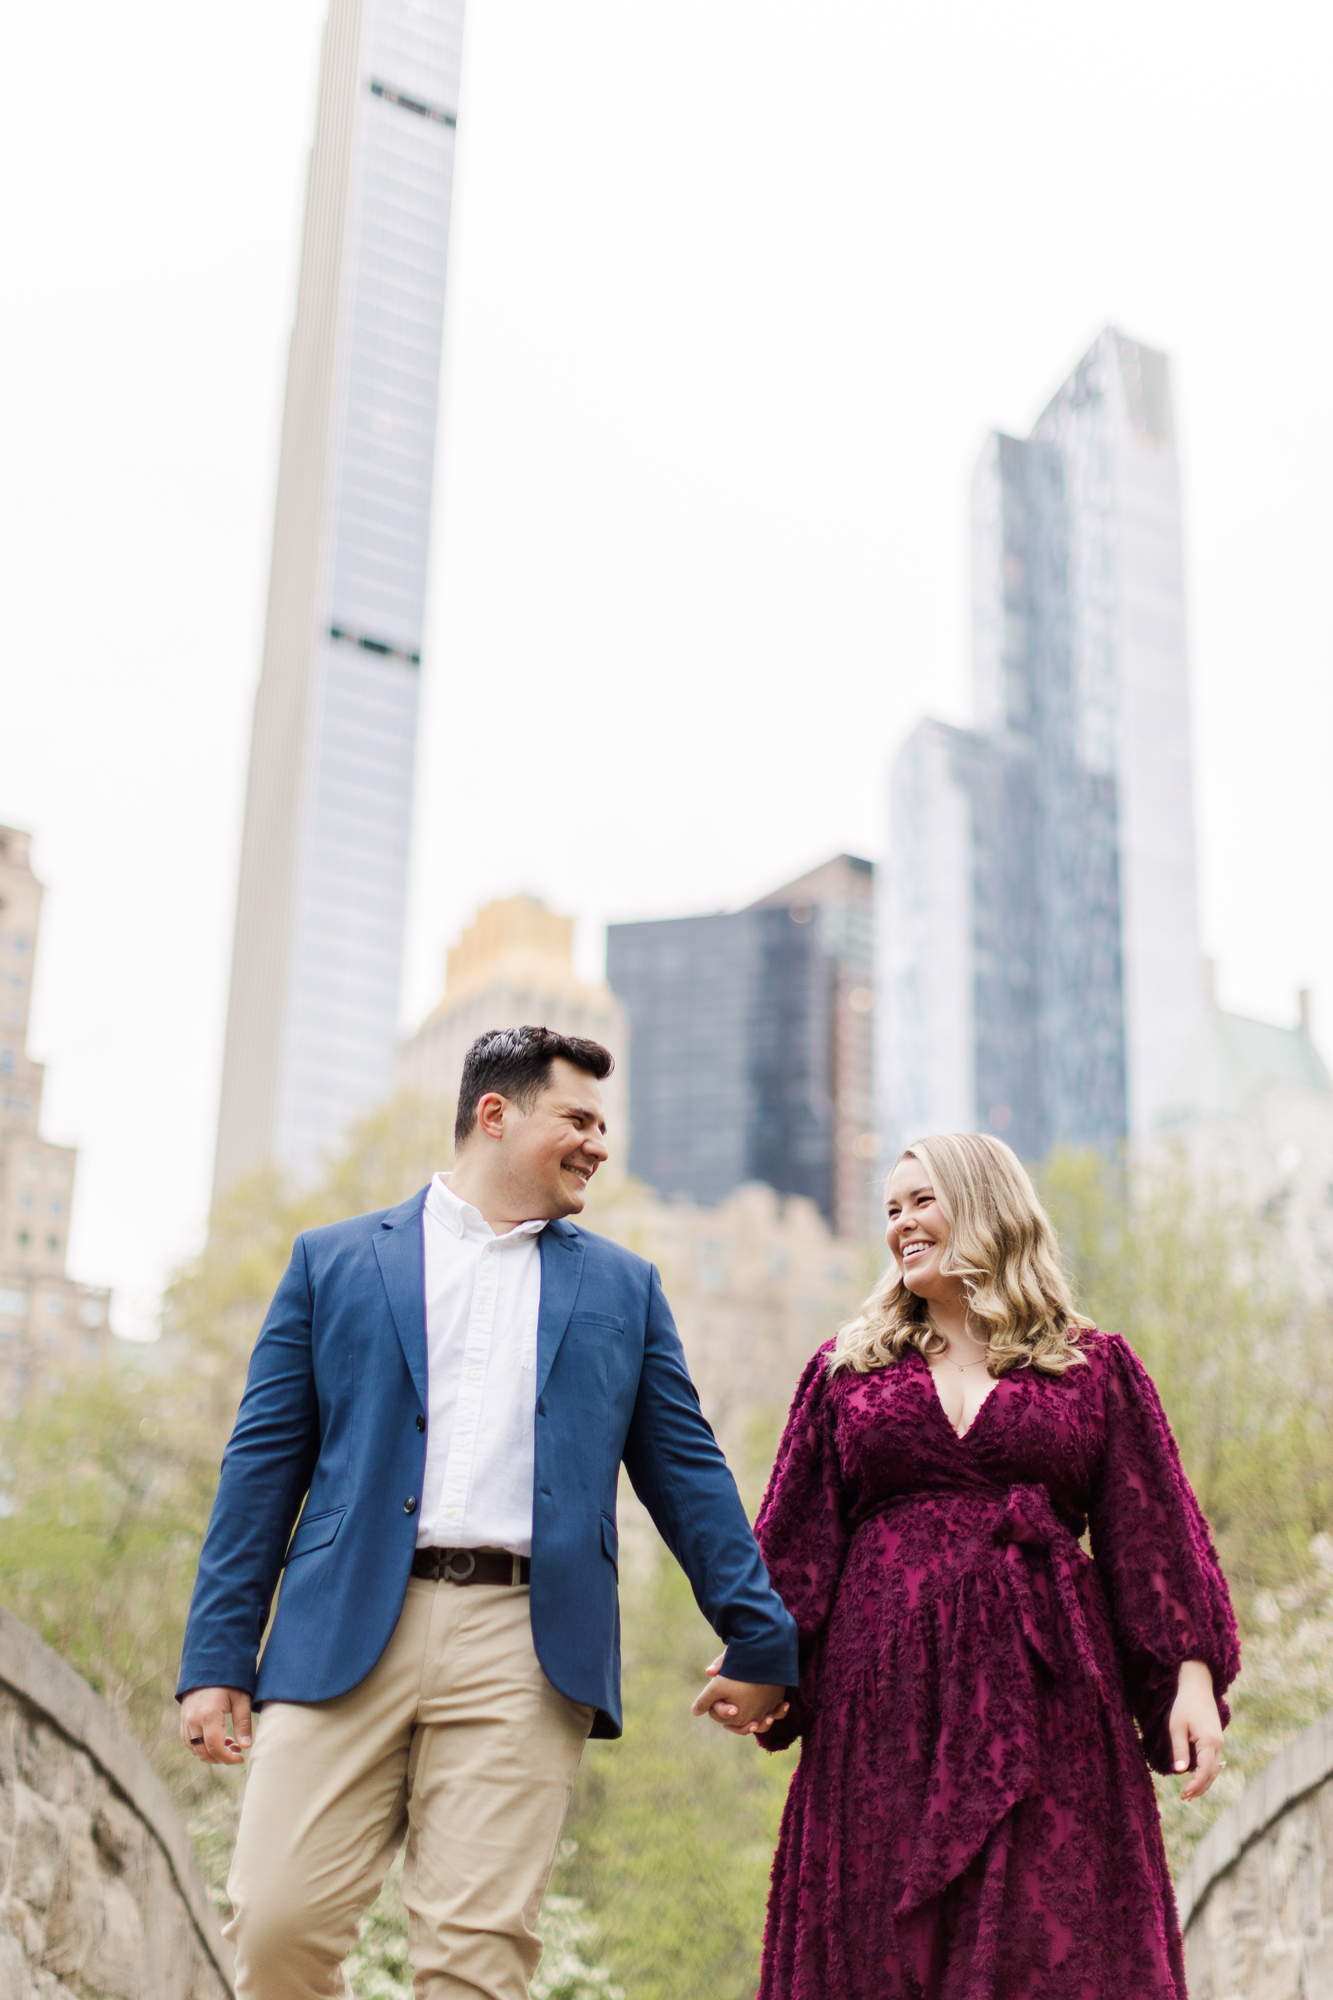 Personal Engagement Pictures in Central Park